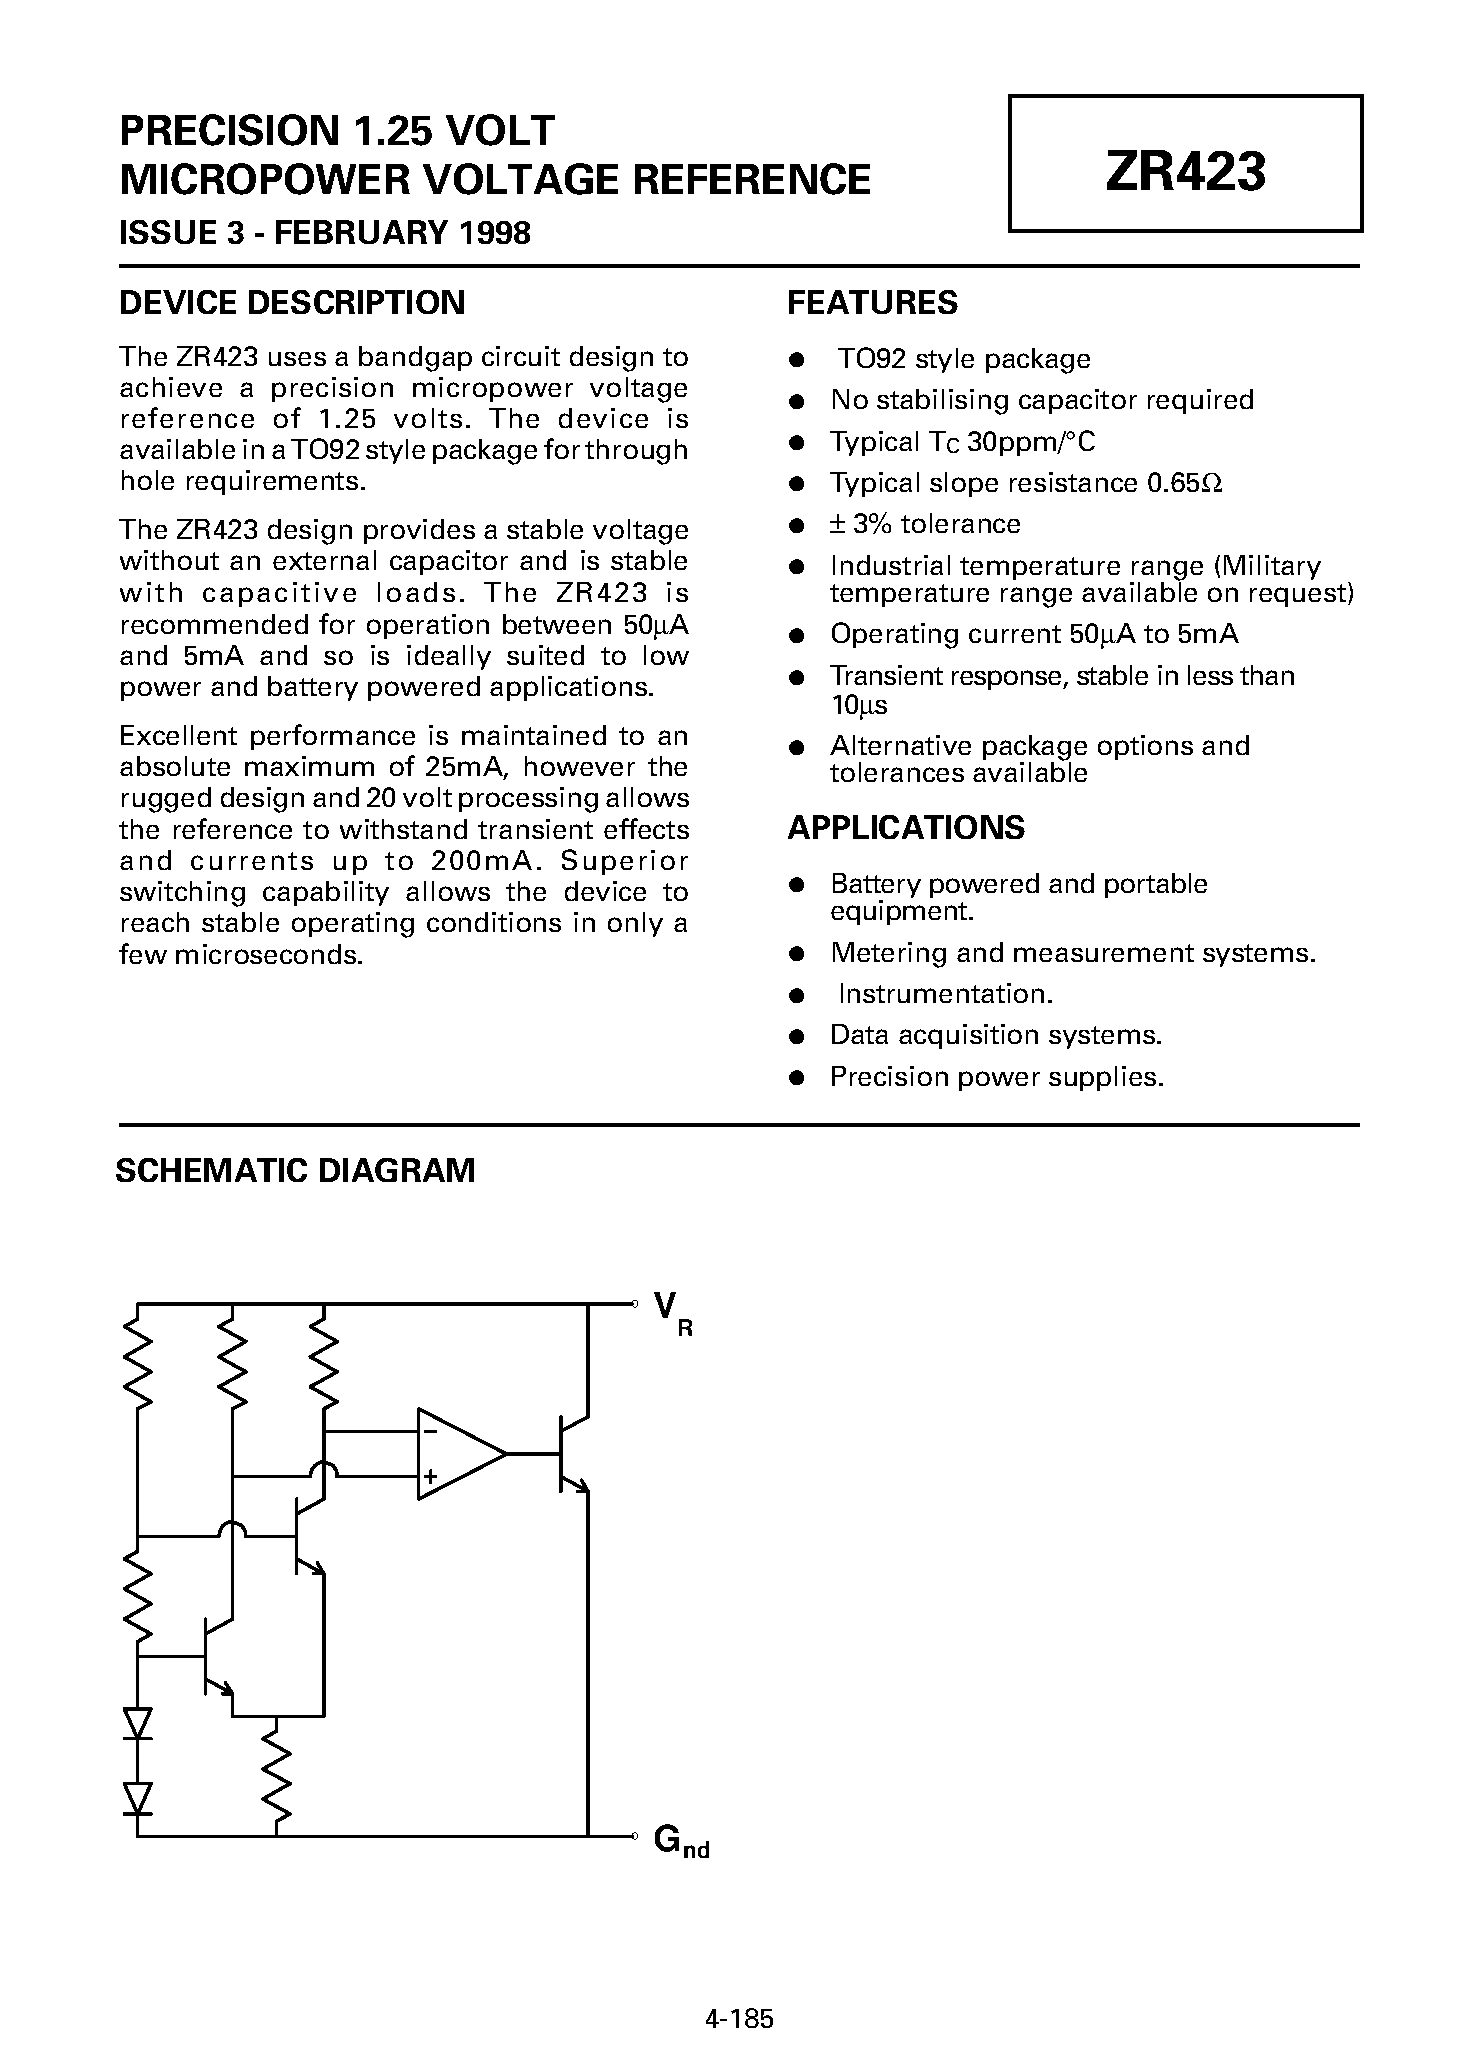 Datasheet ZR423 - PRECISION 1.25 VOLT MICROPOWER VOLTAGE REFERENCE page 1